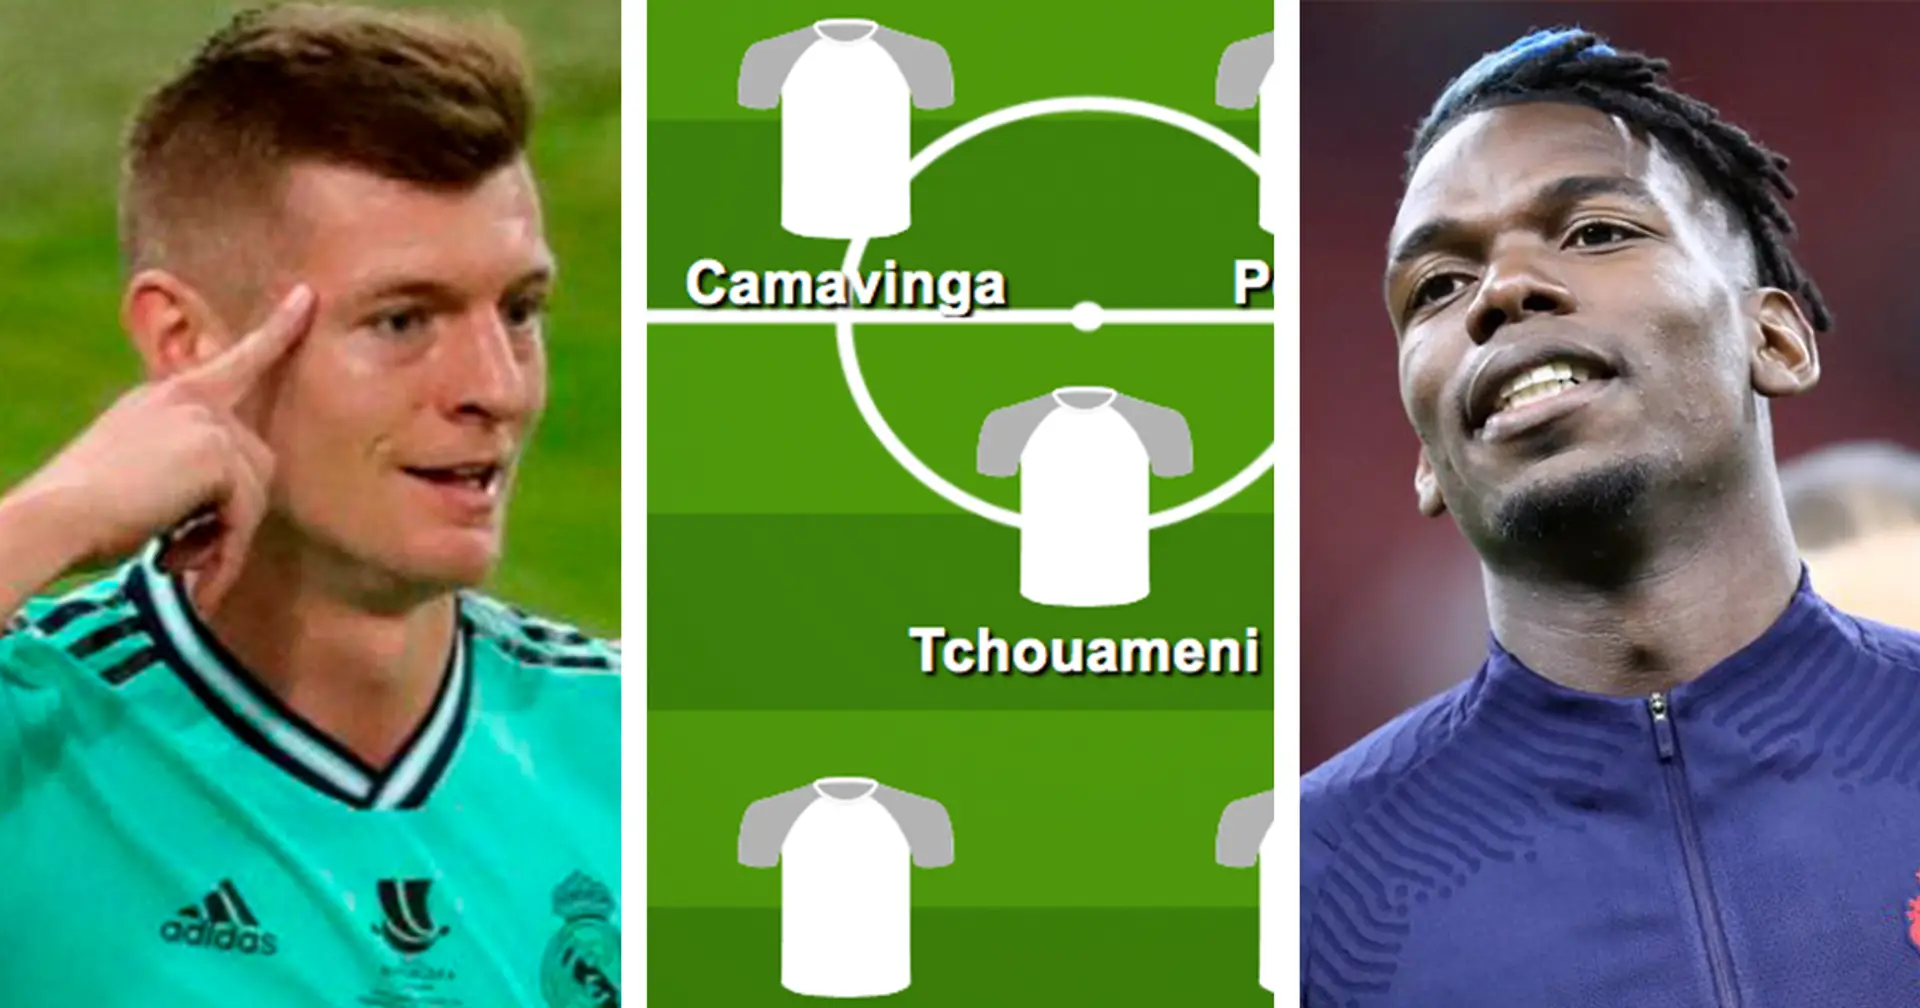 Kroos out, Pogba in: How Real Madrid could line up in 2022 if latest transfer rumours were true